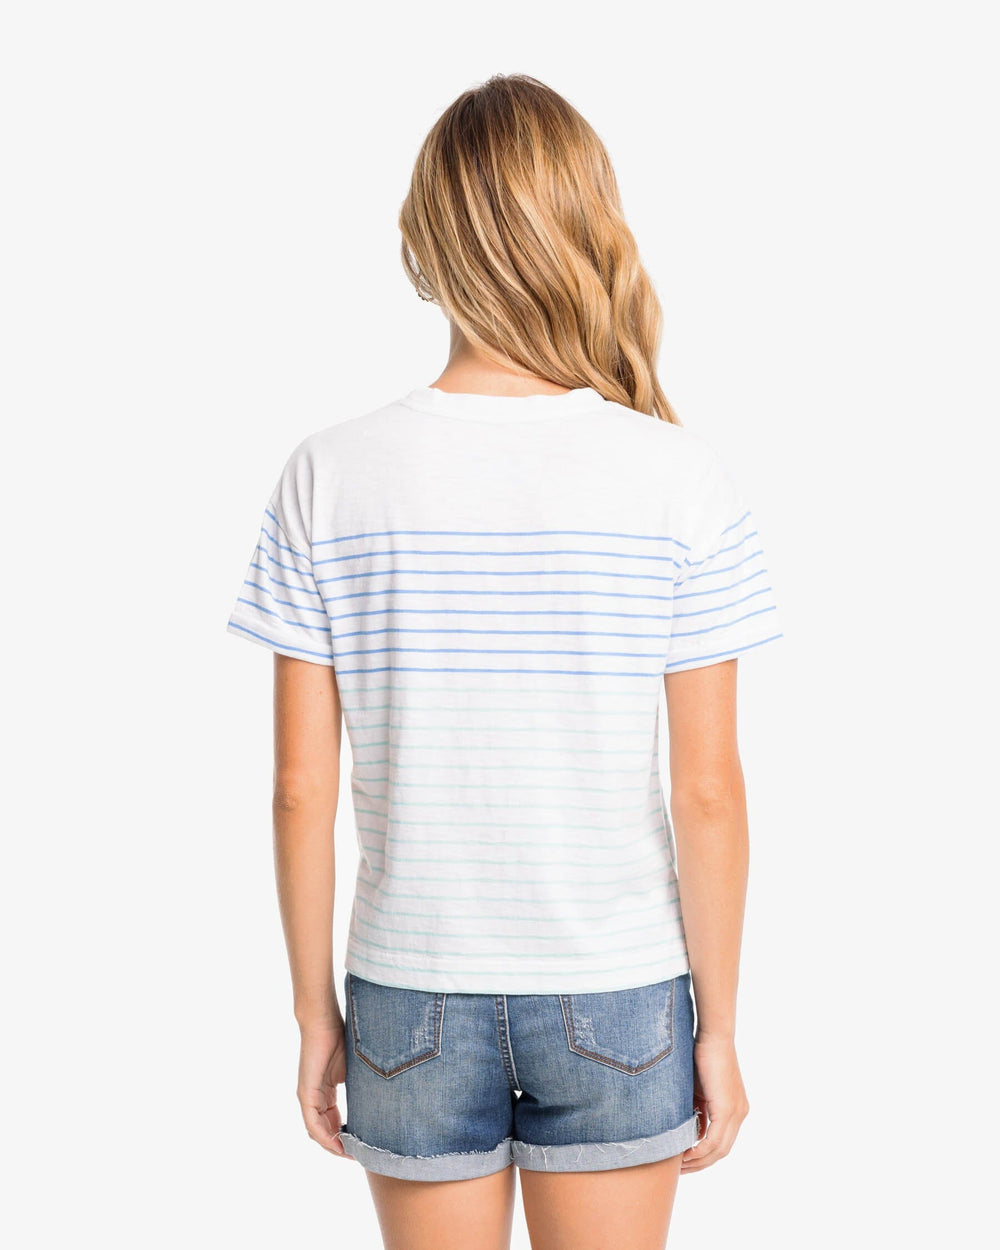 The back view of the Southern Tide Sun Farer Boxy T-Shirt by Southern Tide - Classic White